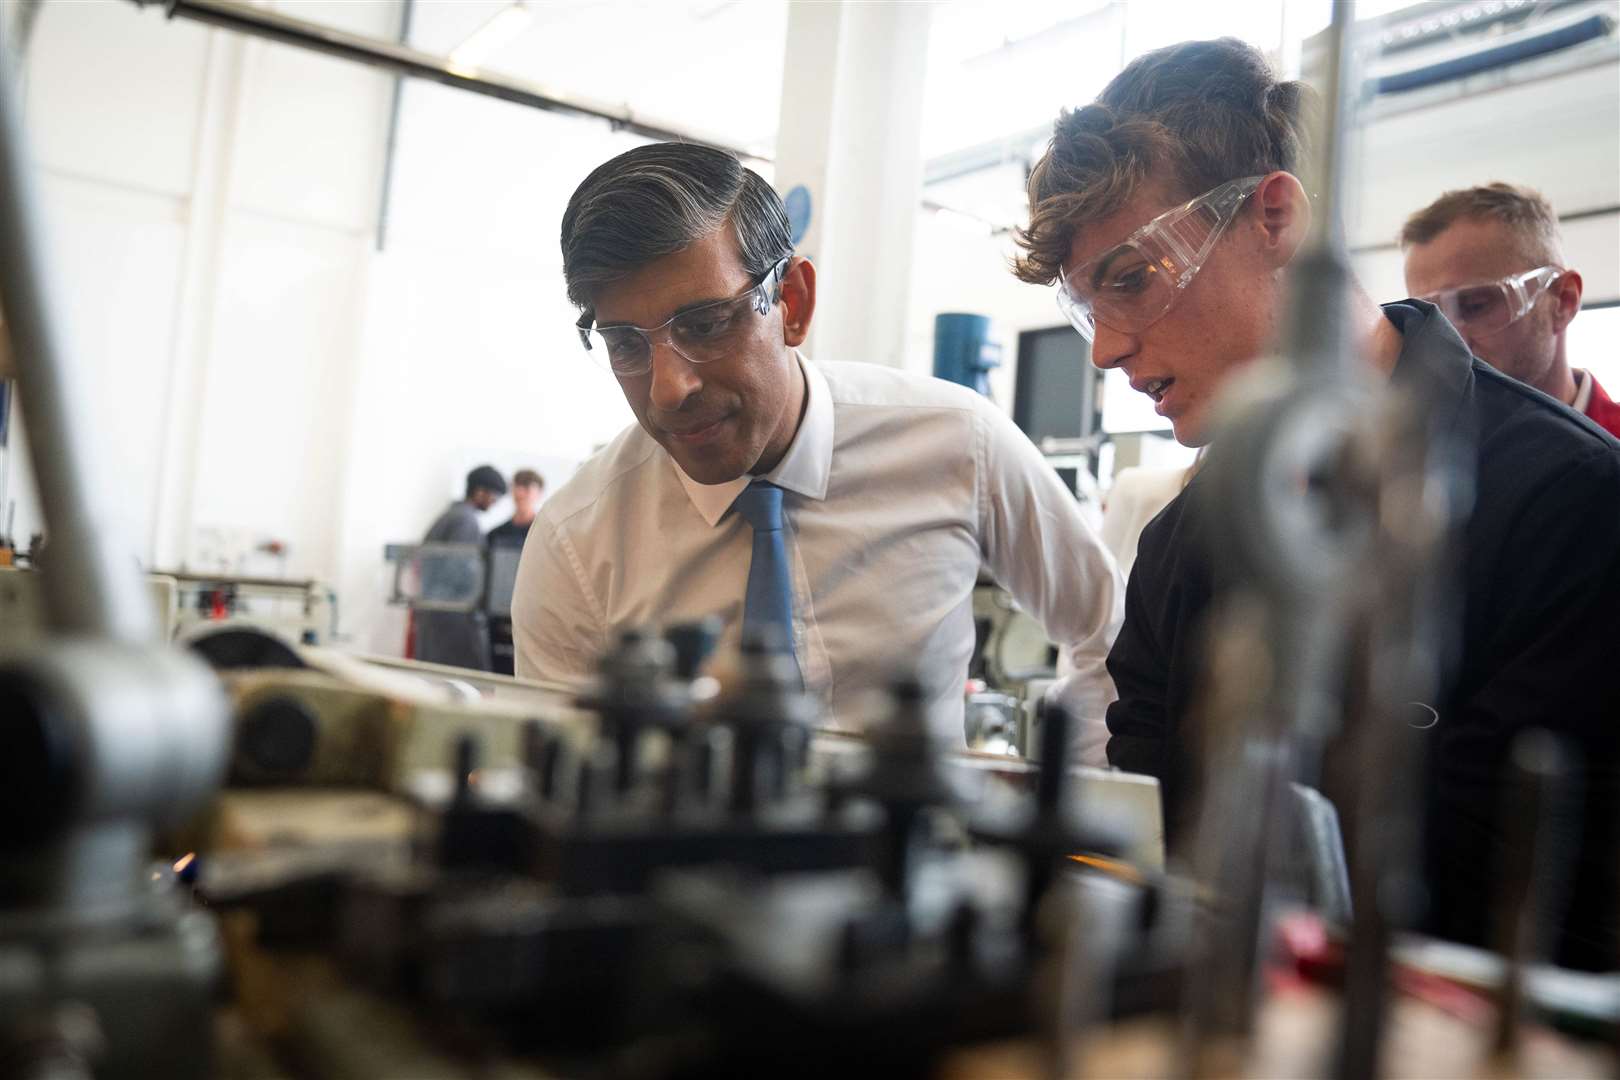 Mr Sunak visited Silverstone University Technical College in Towcester, Northamptonshire after launching his party’s manifesto (James Manning/PA)